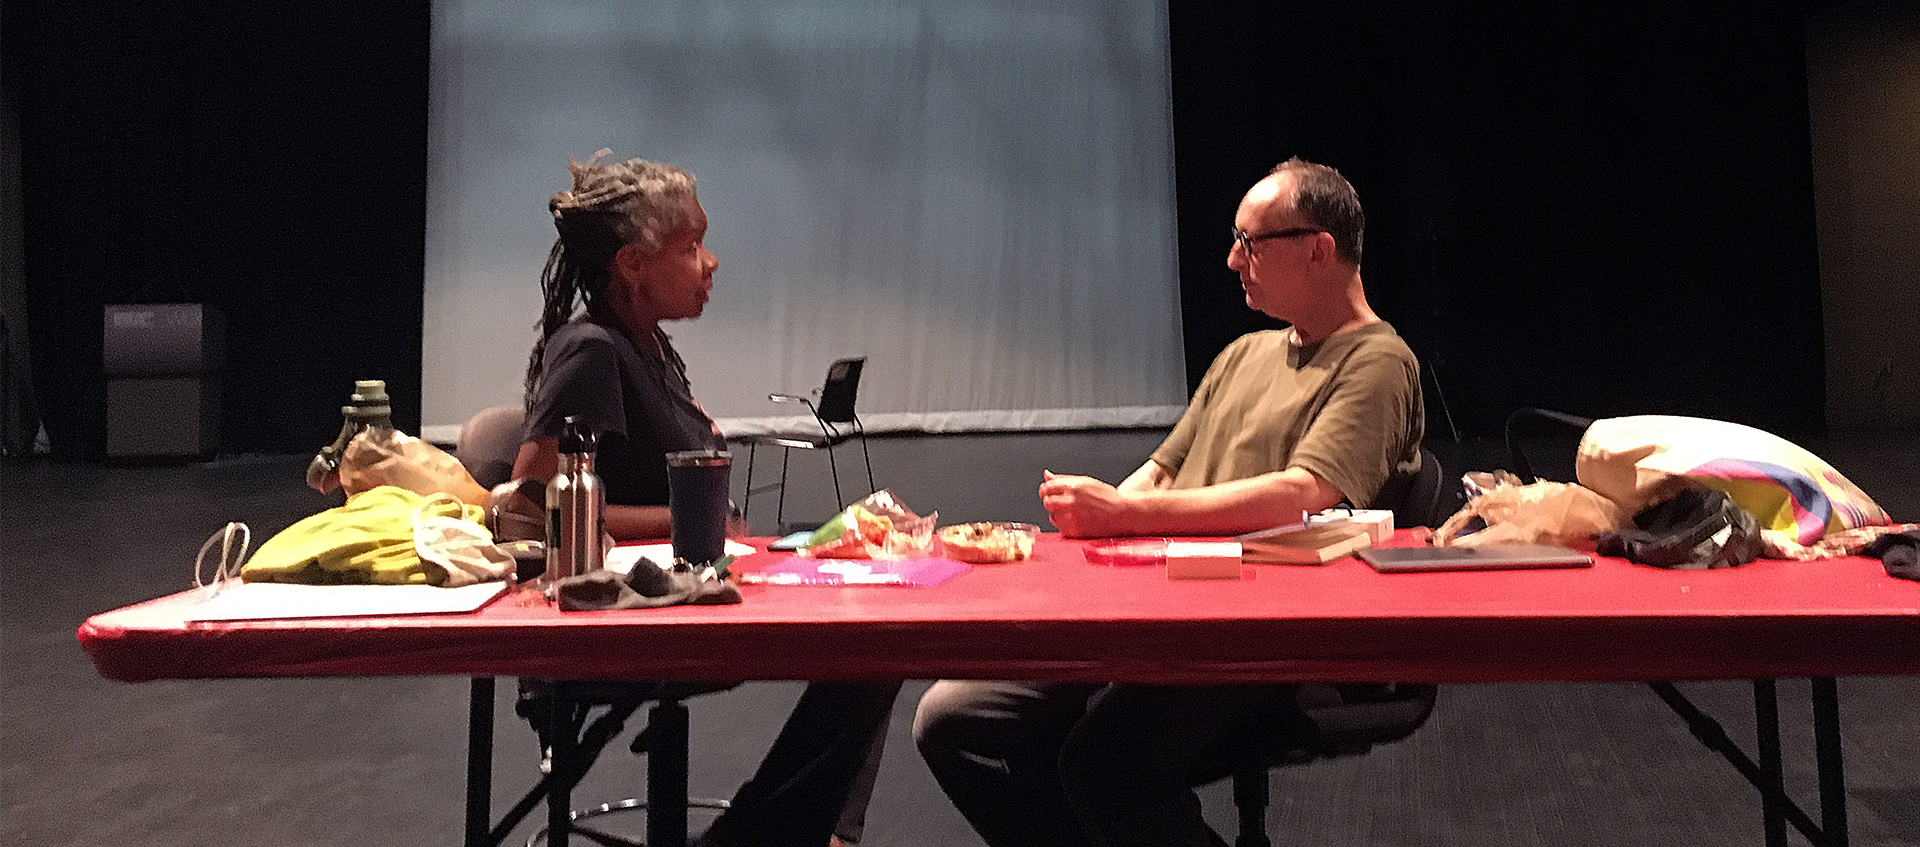 Bebe Miller (on left) and Paul Lazar (on right) seated and facing each other at a red table